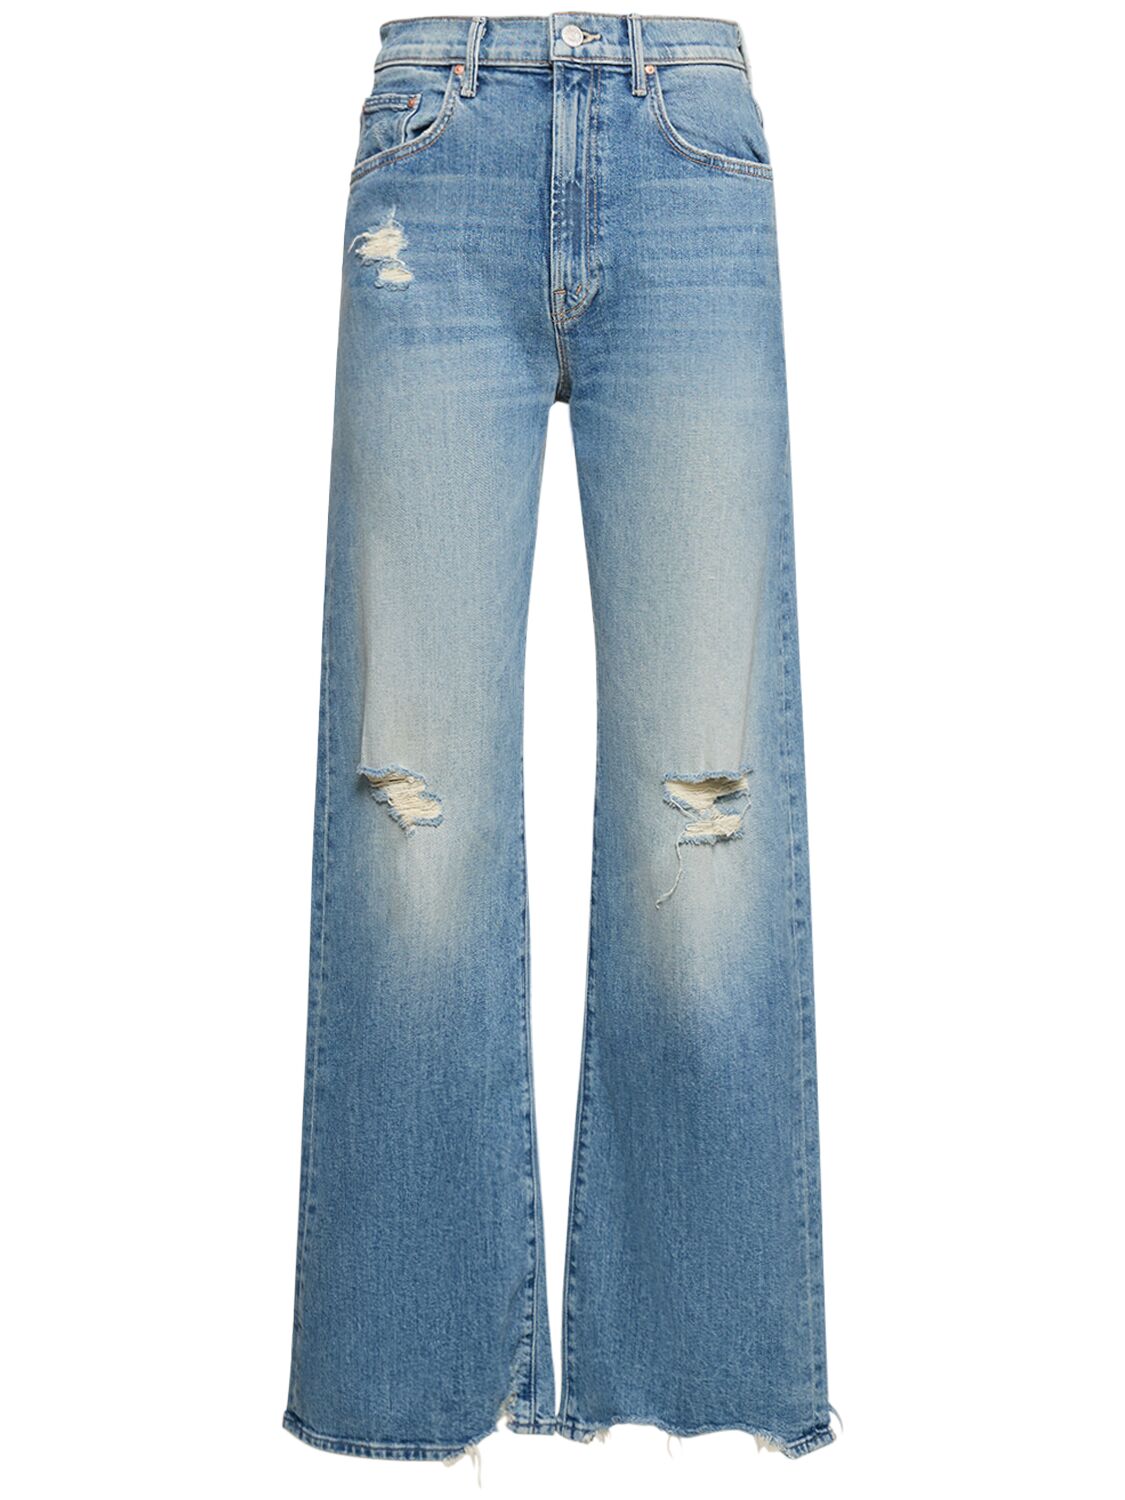 Image of The Lasso Sneak Chew High Rise Jeans